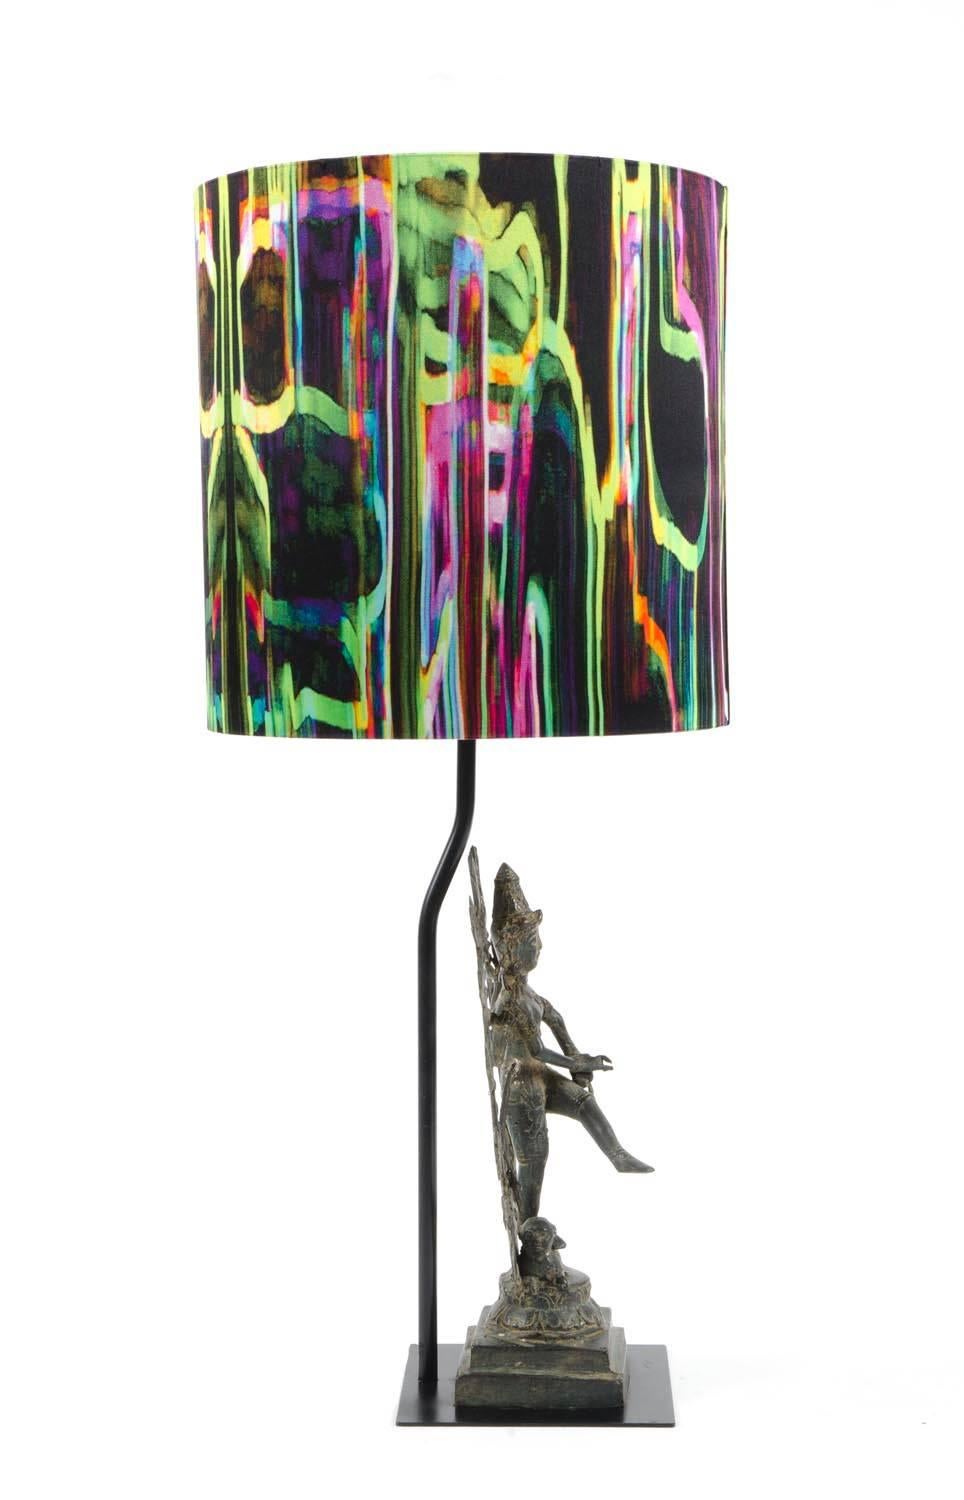 Lamp base in bronze. 40cm (H), 25cm (W), 15cm (D) with silk shade in jungle fever silk fabric by Mariska Meijers. Shade made in Holland trimmed with gold inside. 25cm (H), 25cm (D). Total height lampshade plus base: 62cm.

Please note that only